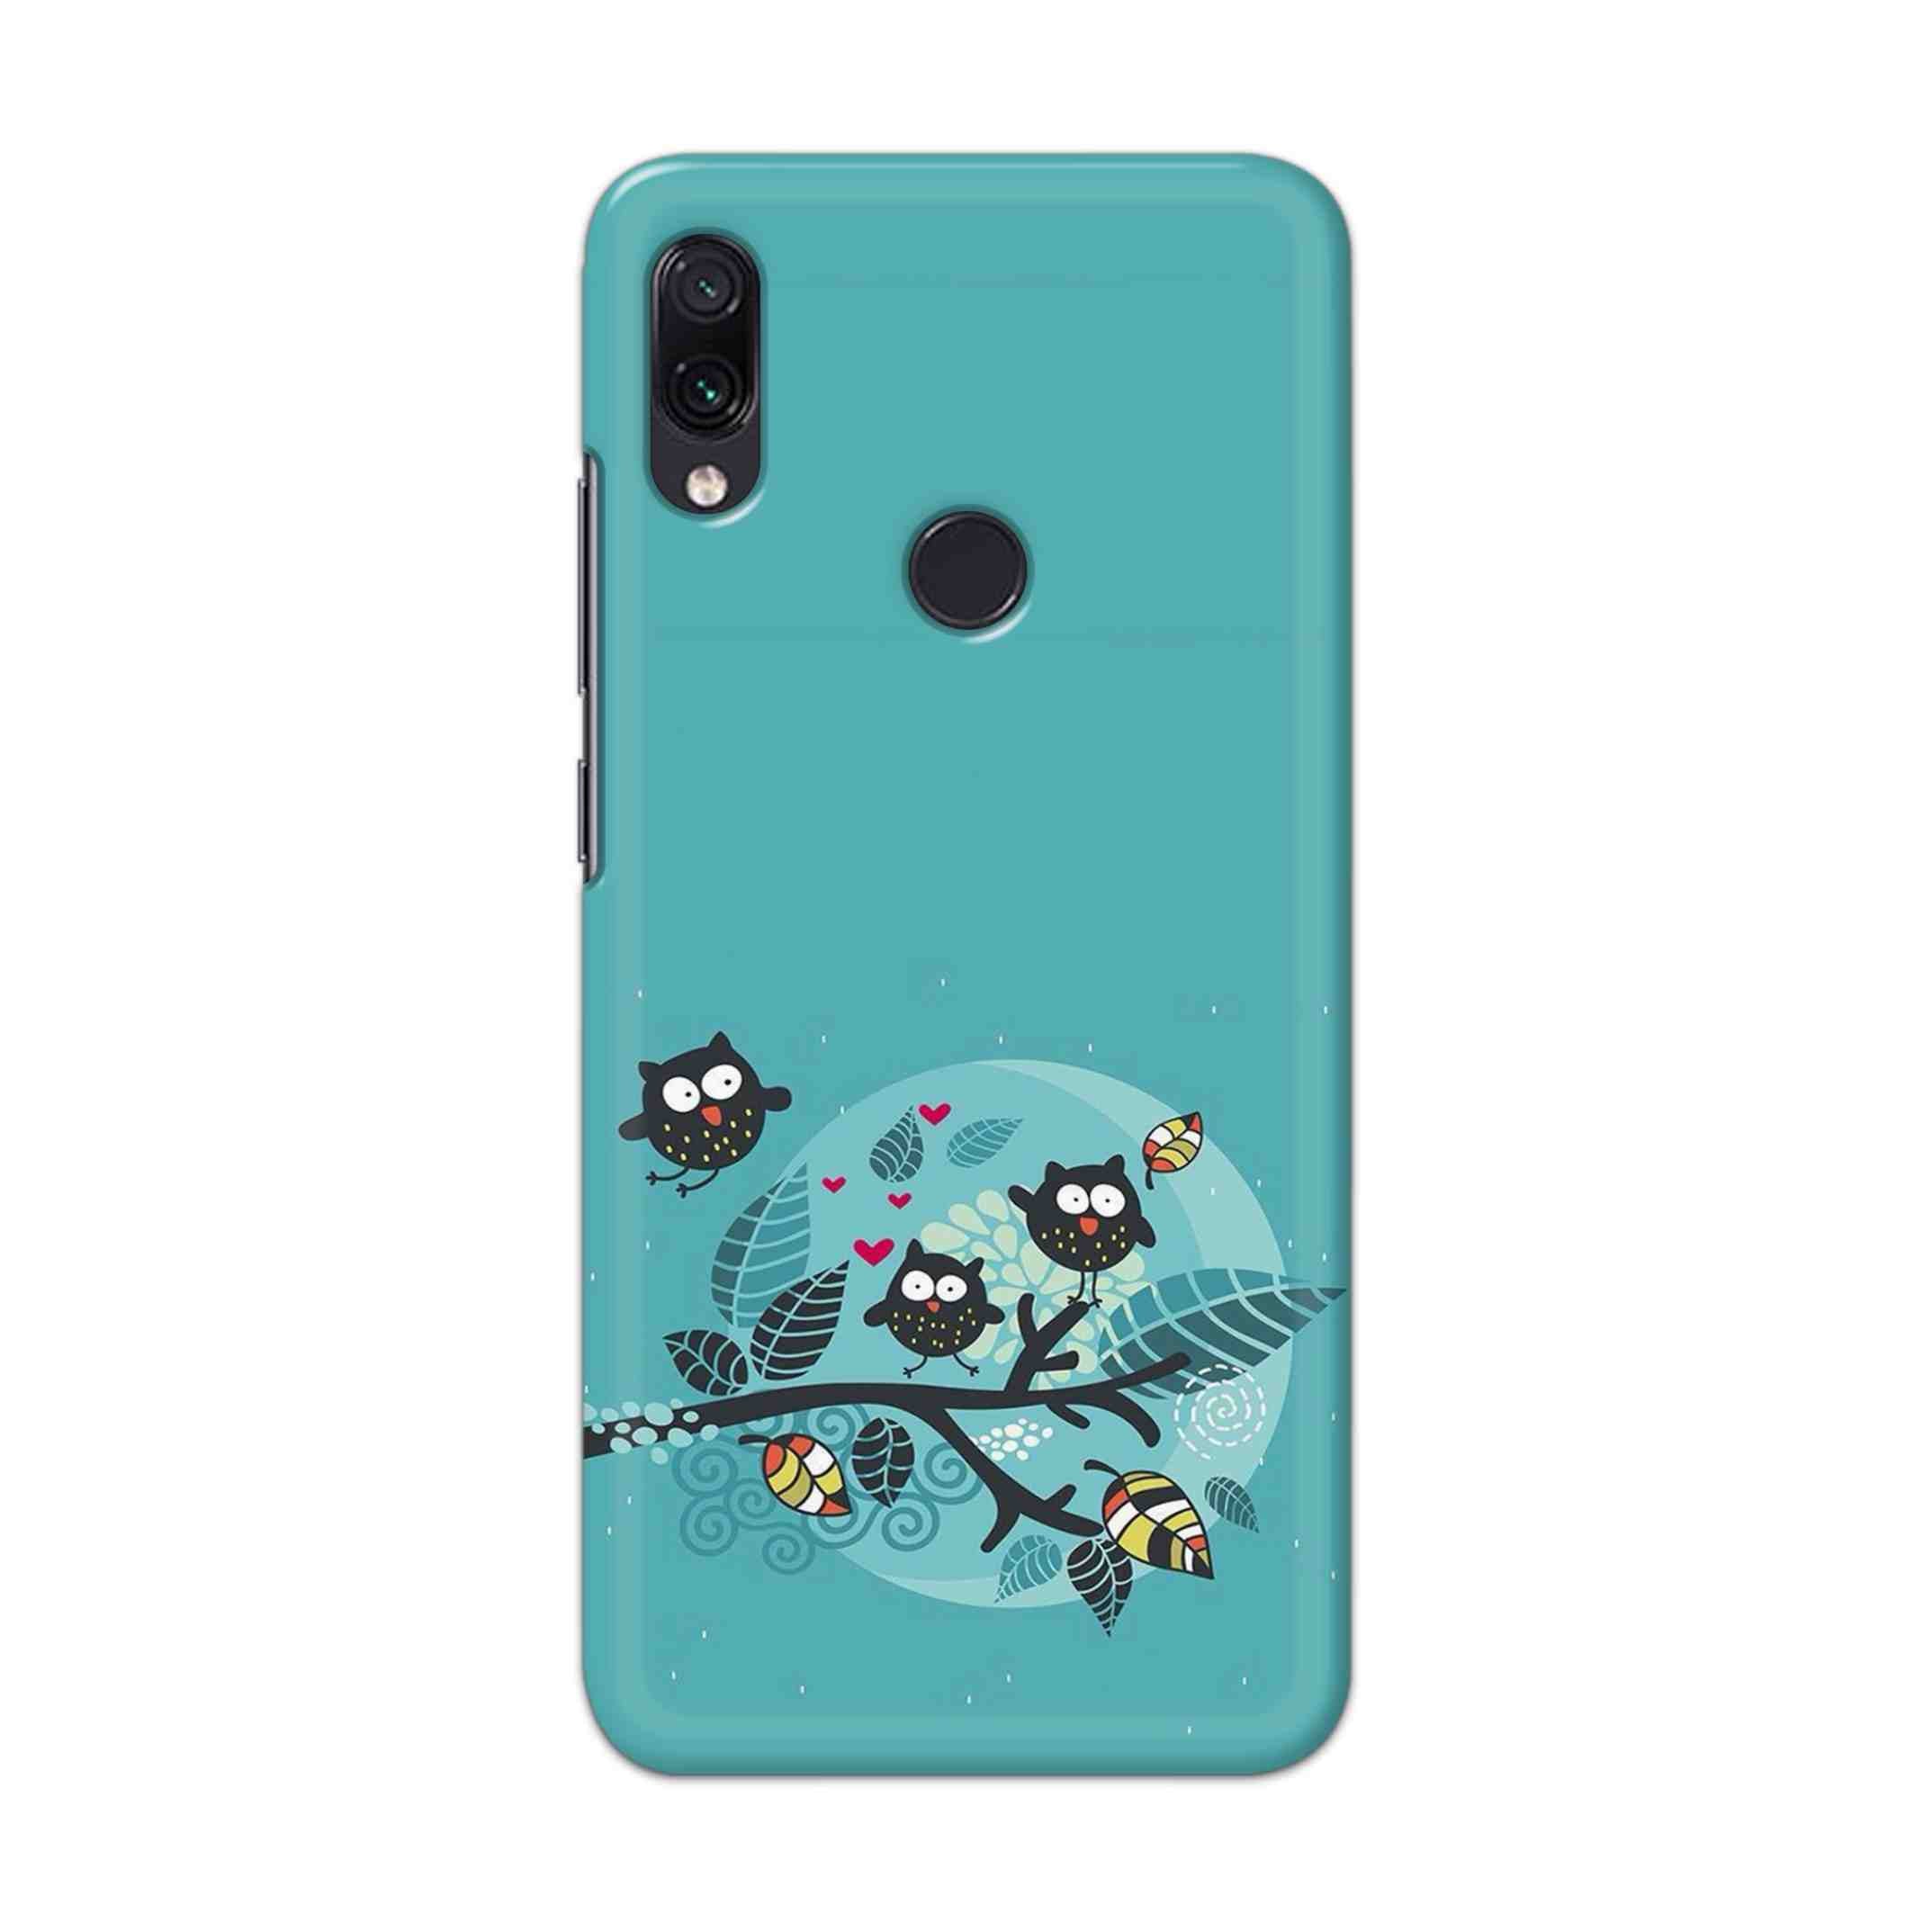 Buy Owl Hard Back Mobile Phone Case Cover For Xiaomi Redmi 7 Online